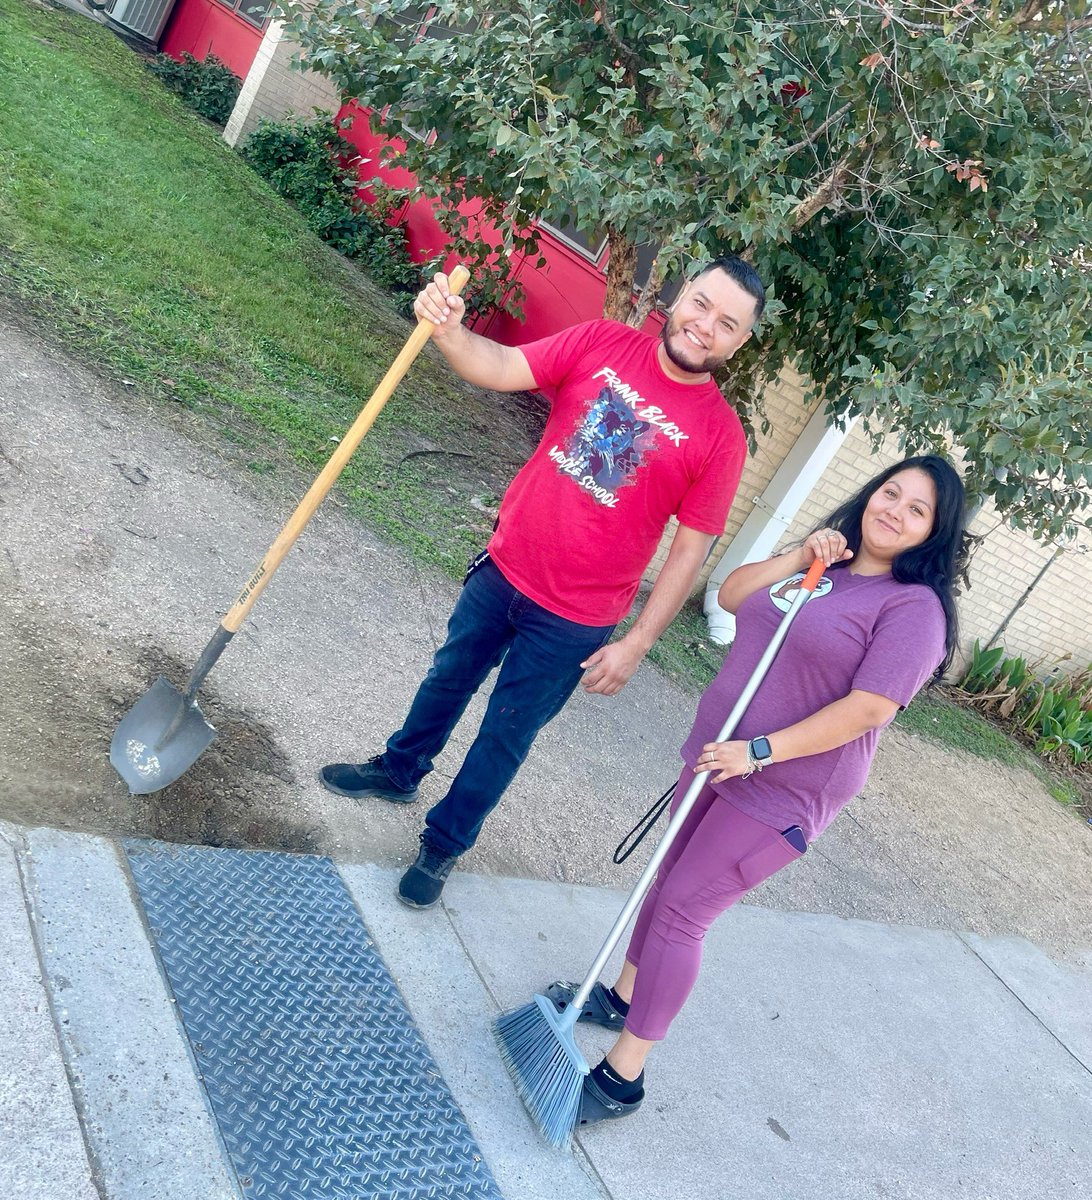 Amazing morning at Black MS for our Paws for Change Beautification Day! Working with the community, parents, and students to revamp our school. Painting lockers, sprucing up flower beds and revitalizing our pond - together we're creating a beautiful campus!  #CommunityPride #HISD